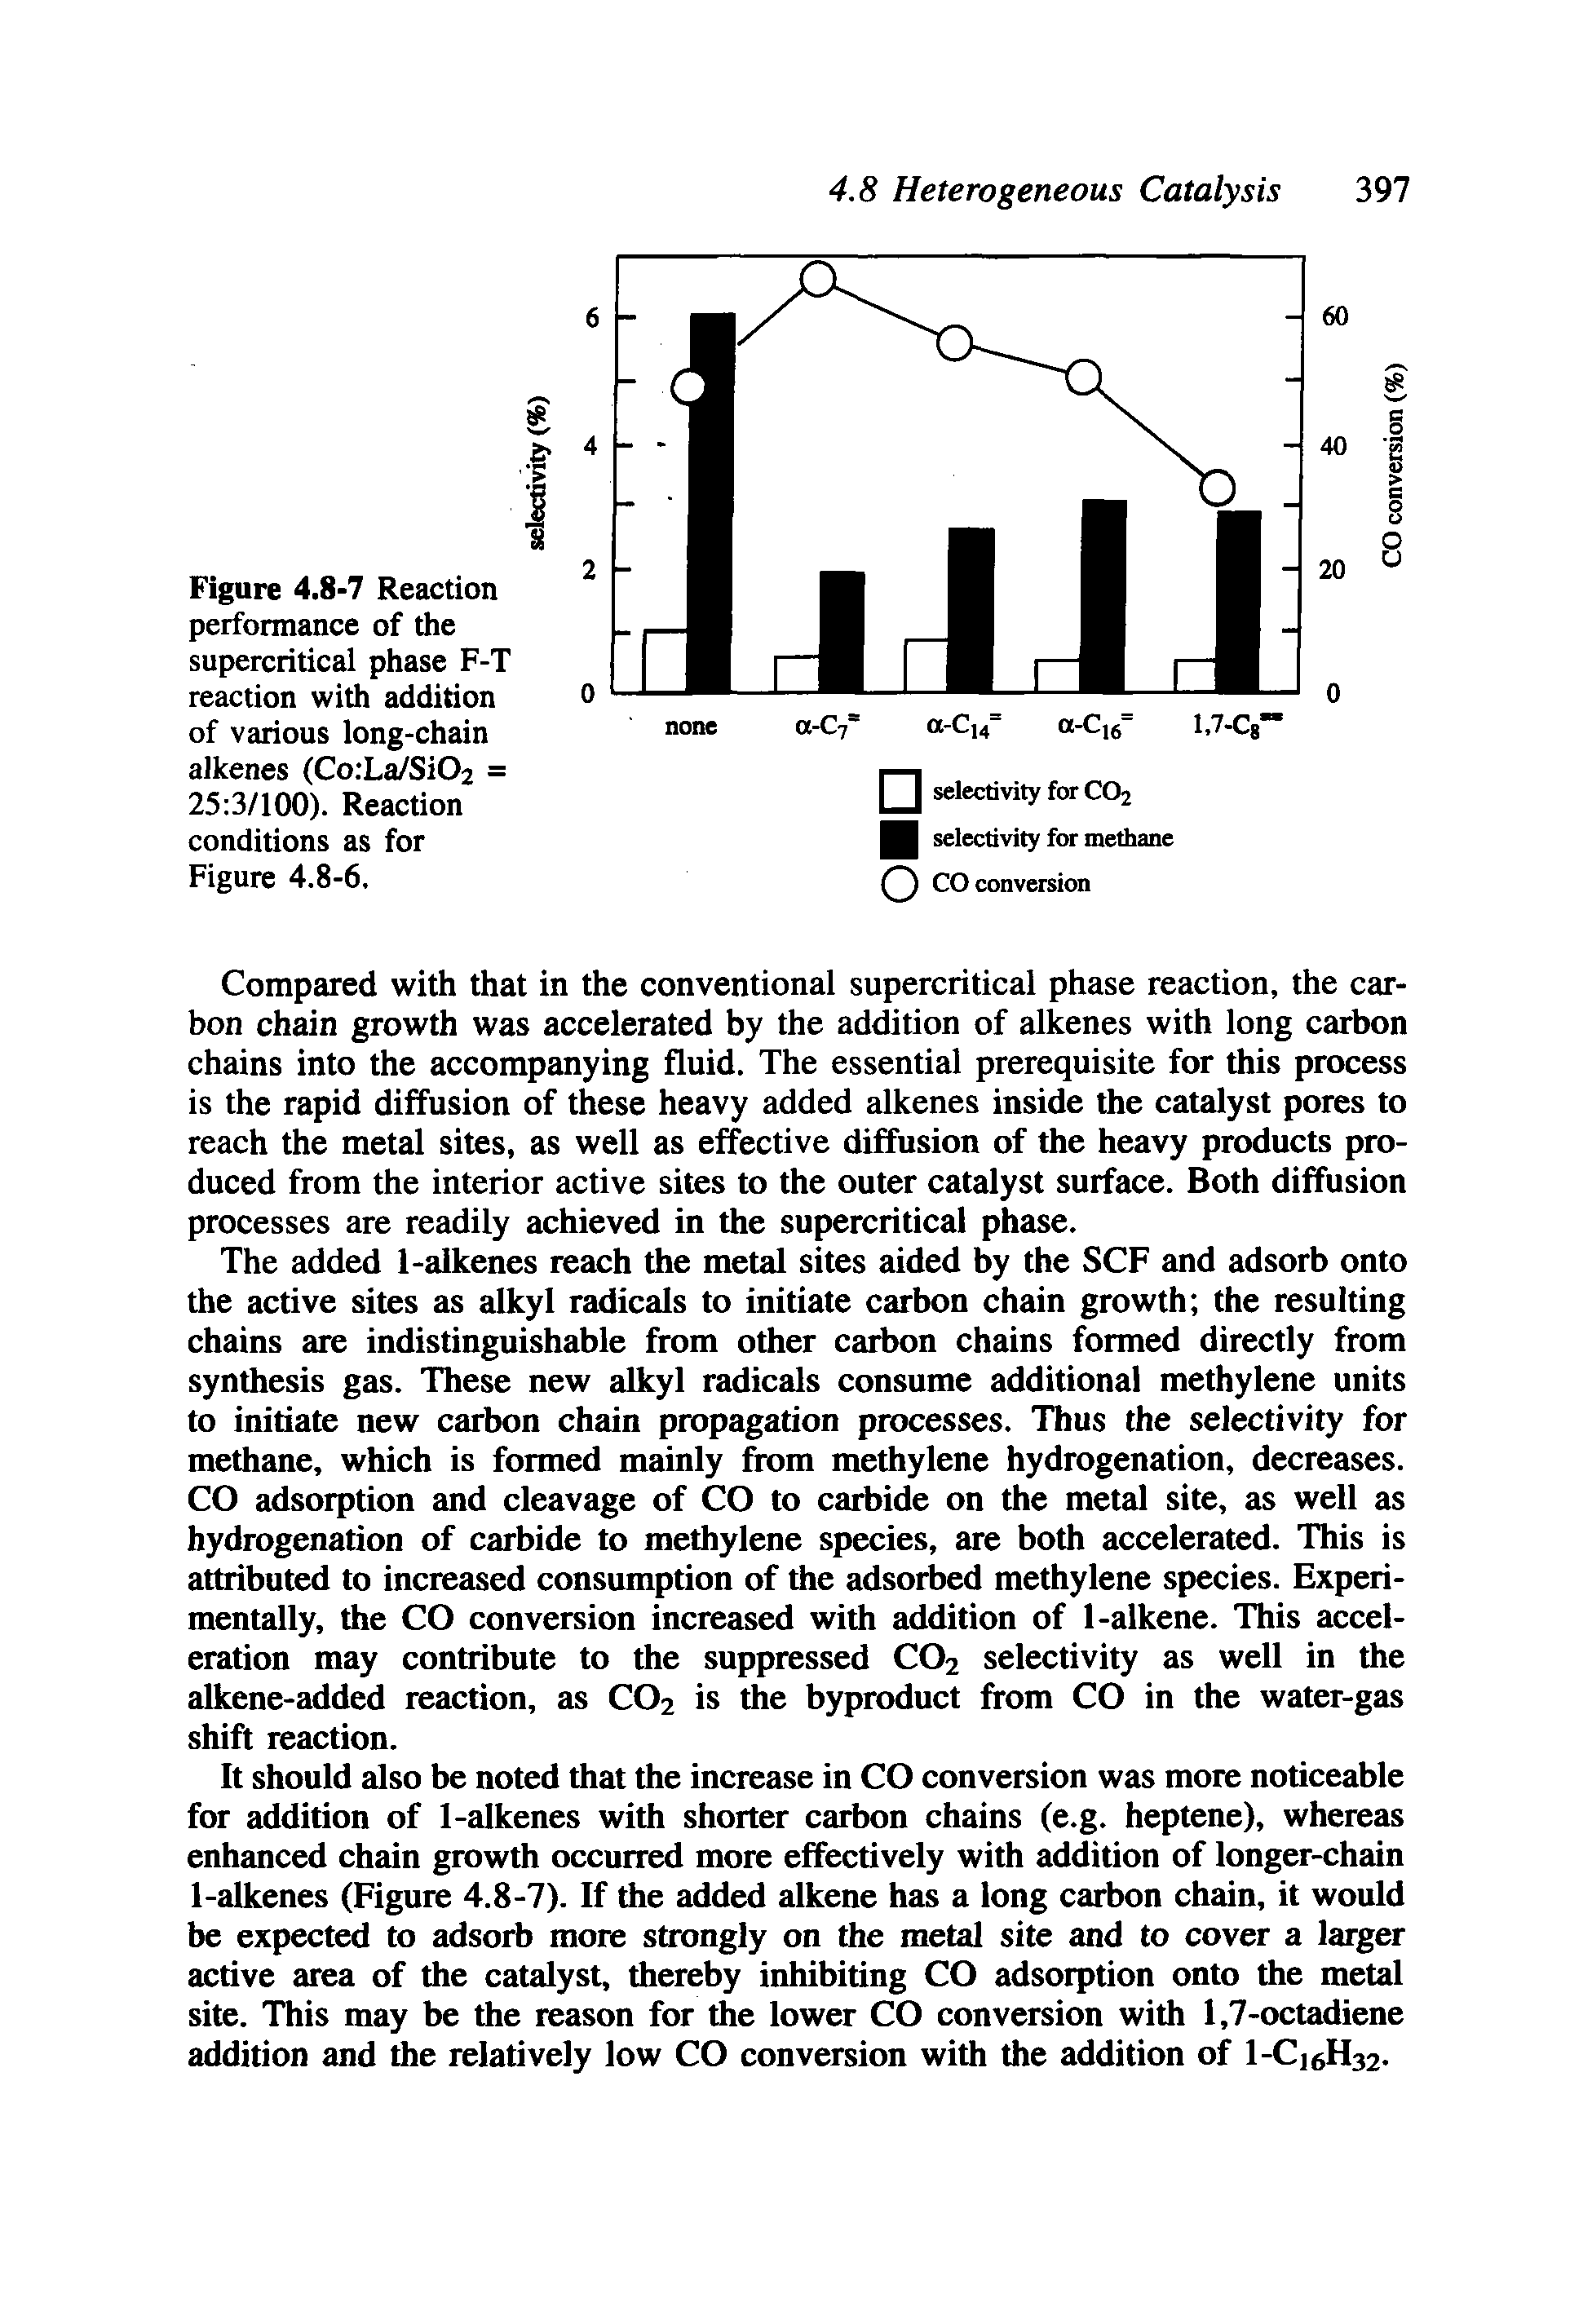 Figure 4.8-7 Reaction performance of the supercritical phase F-T reaction with addition of various long-chain alkenes (CorLa/SiOa = 25 3/100). Reaction conditions as for Figure 4.8-6.